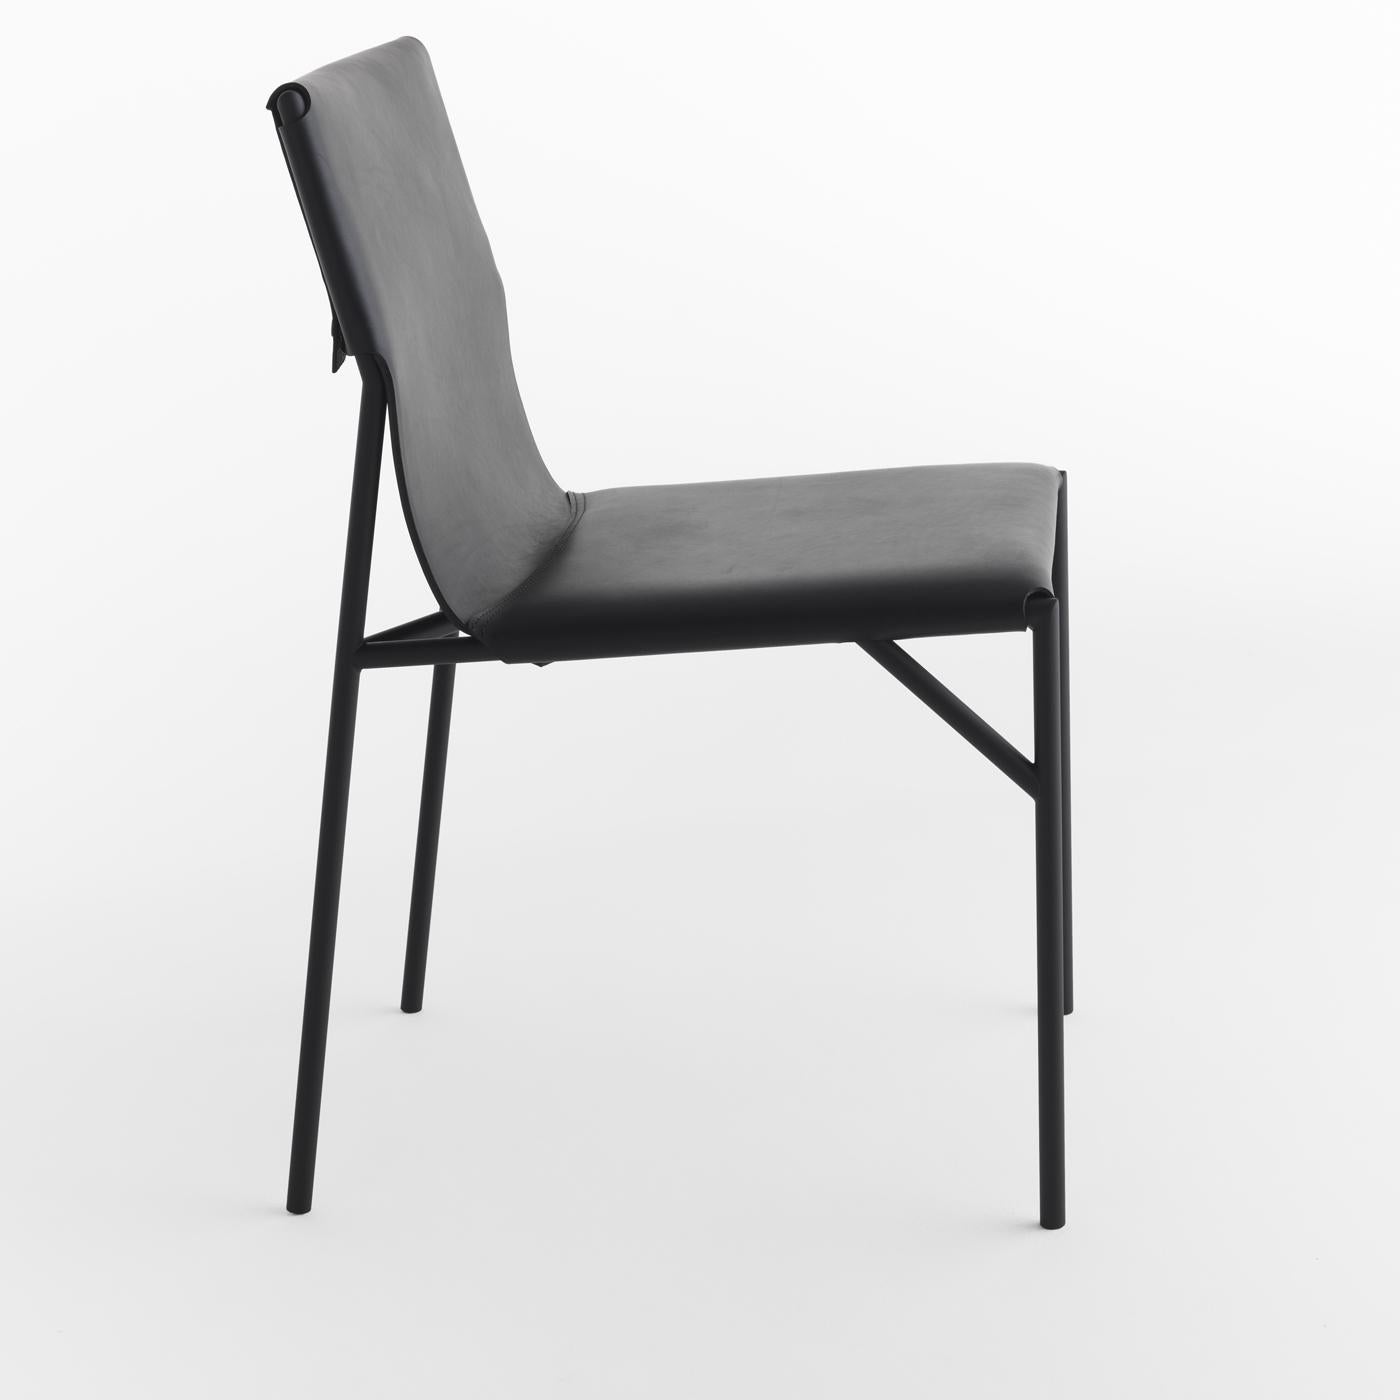 Designed by March Thorpe for the Tout Le Jour collection, this stunning chair is a modern and elegant piece of functional decor. Resting on a slim and minimalist metal structure finished in matte black, the ergonomic seat and back are upholstered in